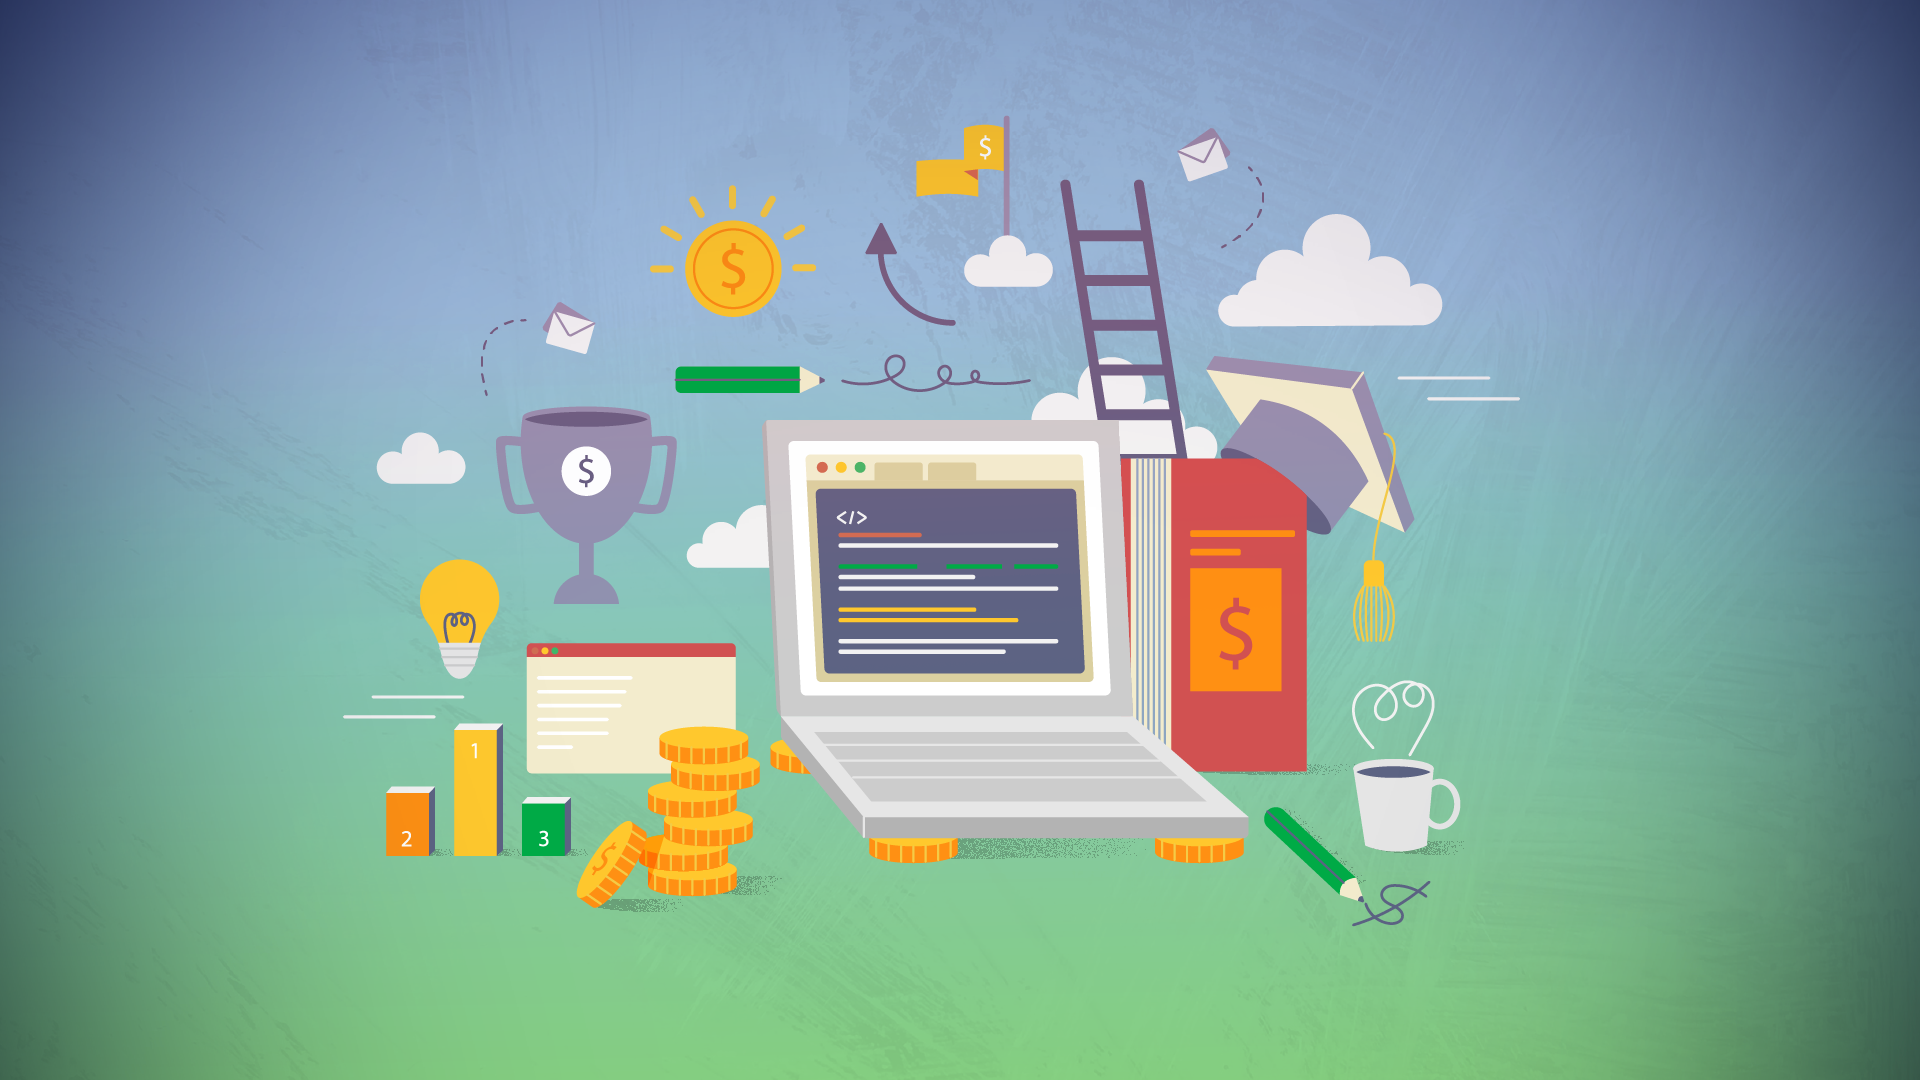 Illustration of various ways to make money from coding